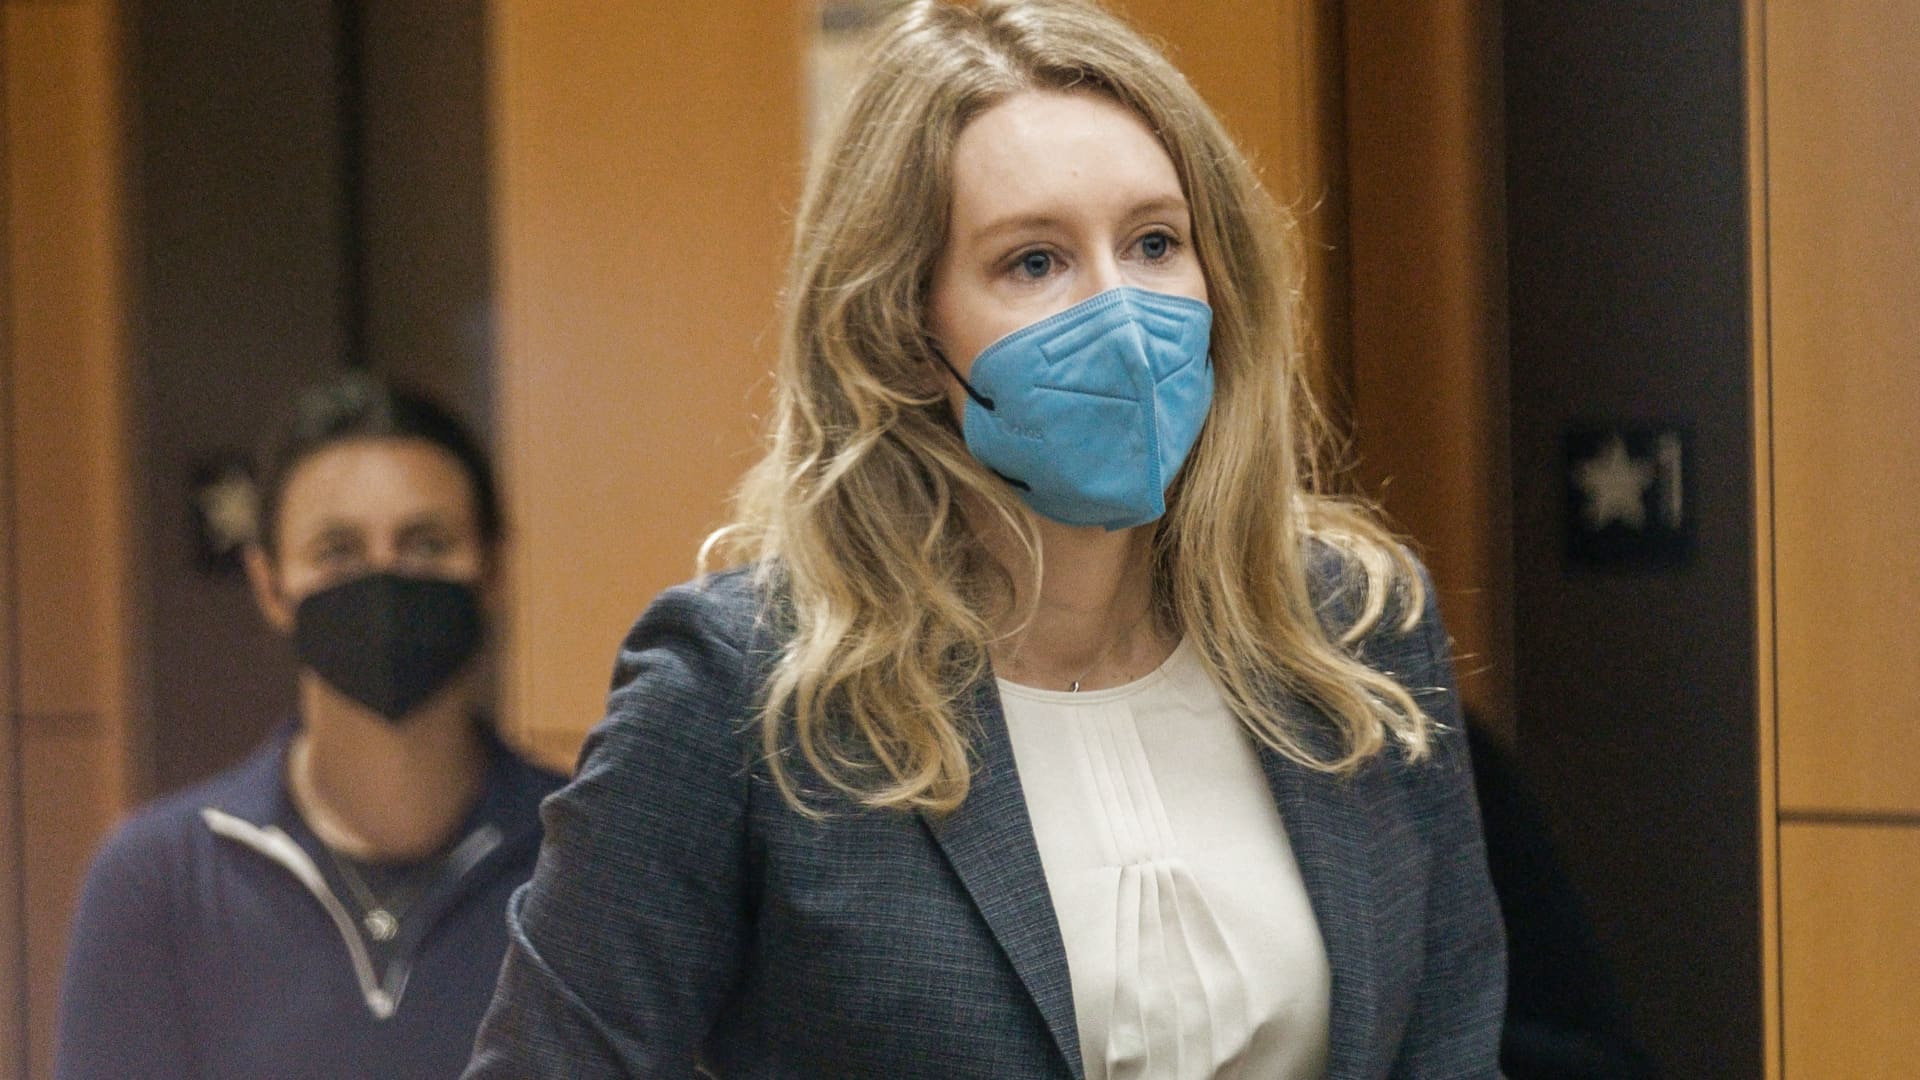 Elizabeth Holmes, the founder and former CEO of blood testing and life sciences company Theranos, arrives for the first day of her fraud trial, outside Federal Court in San Jose, California. September 8, 2021.